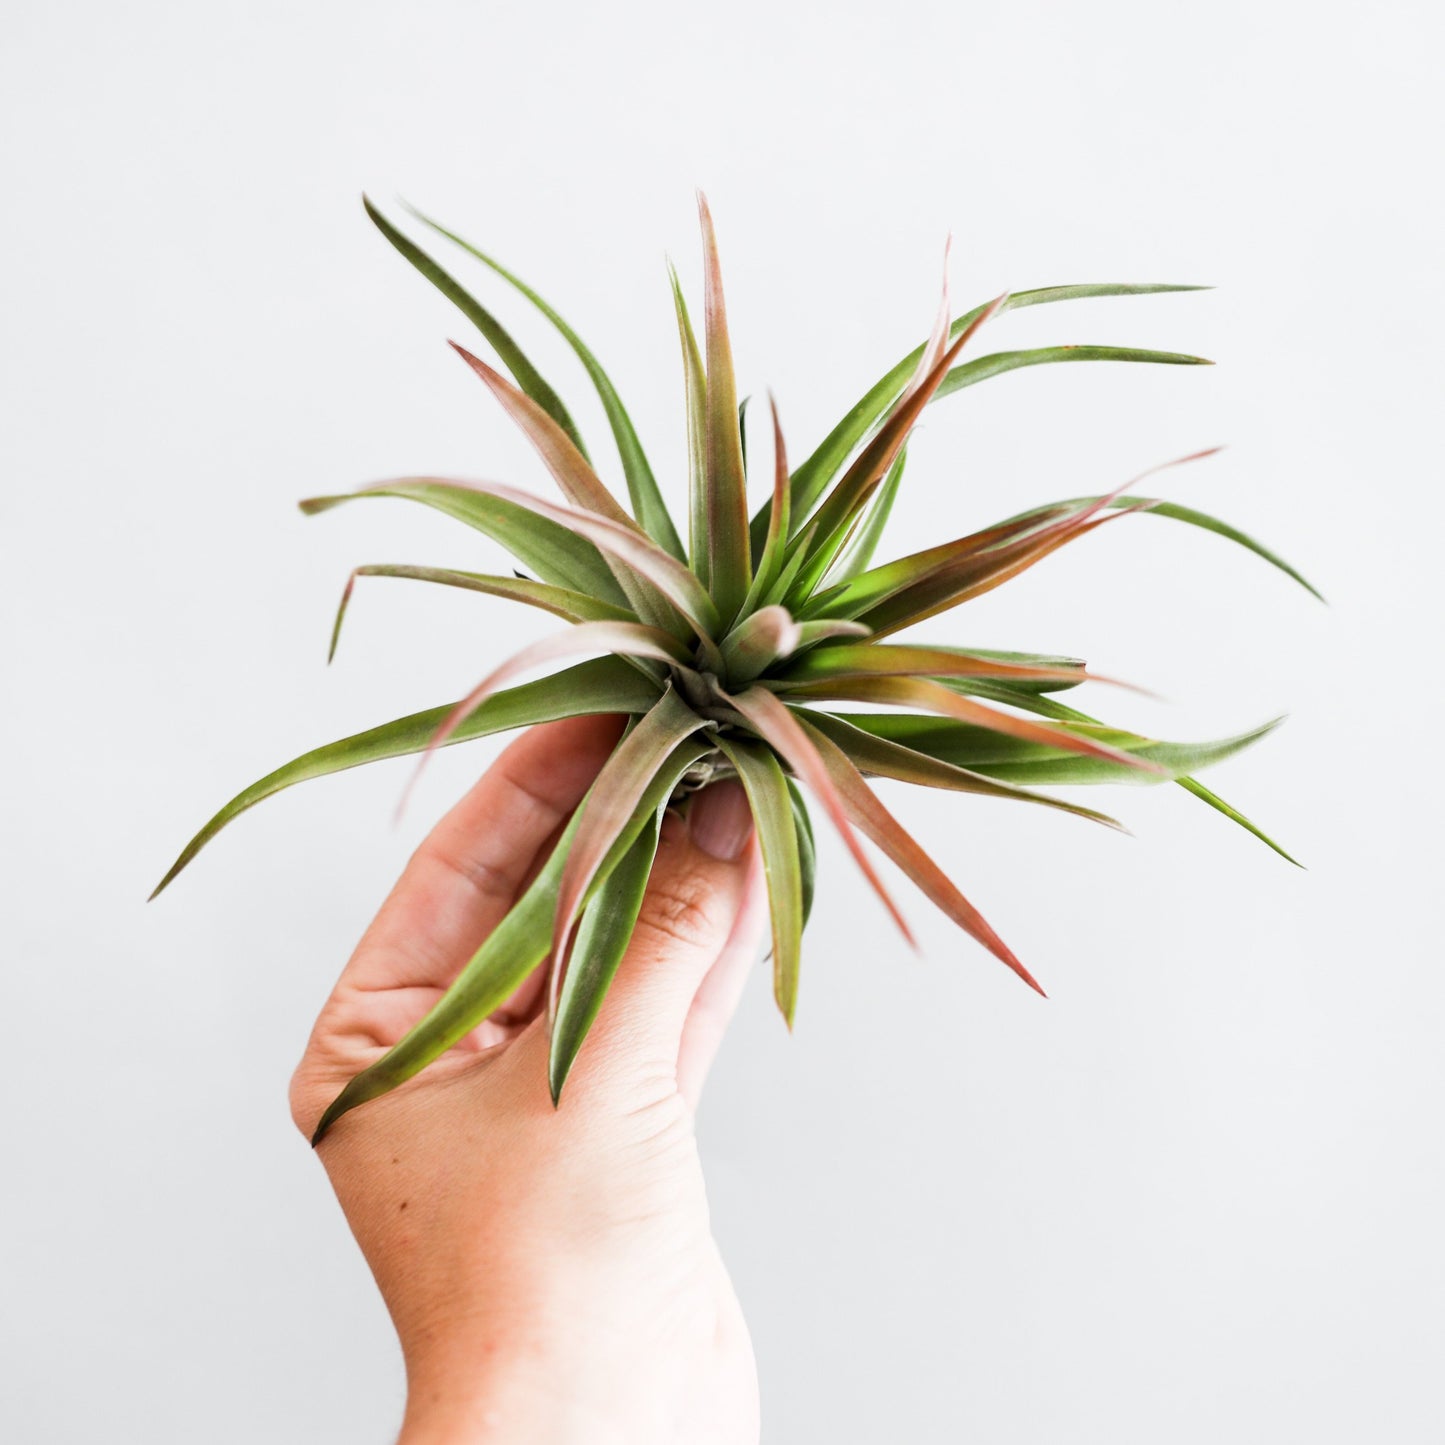 On a white background is a Tillandsia Velutina air plant.